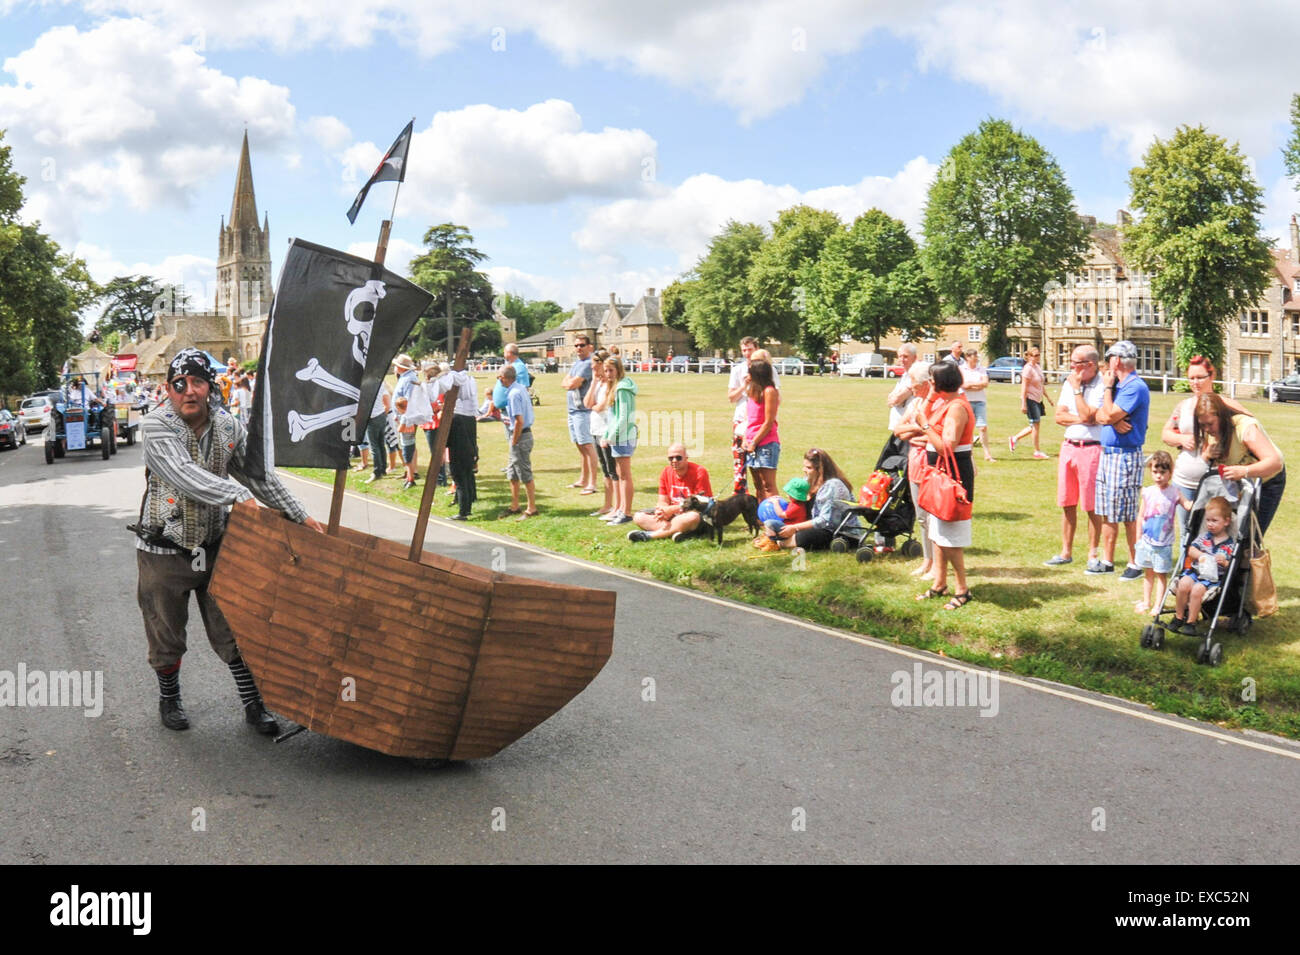 Witney, Oxfordshire, UK. 11th July, 2015.   The annual carnival through the streets of the Prime Minister's constituency of Witney was a themed event with the this year's theme being that of pirates and the sea. Given that this is one of the the most landlocked places in England this is a surprising and innovative theme for the famous Wool town to have.  Credit:  Desmond Brambley/Alamy Live News Stock Photo